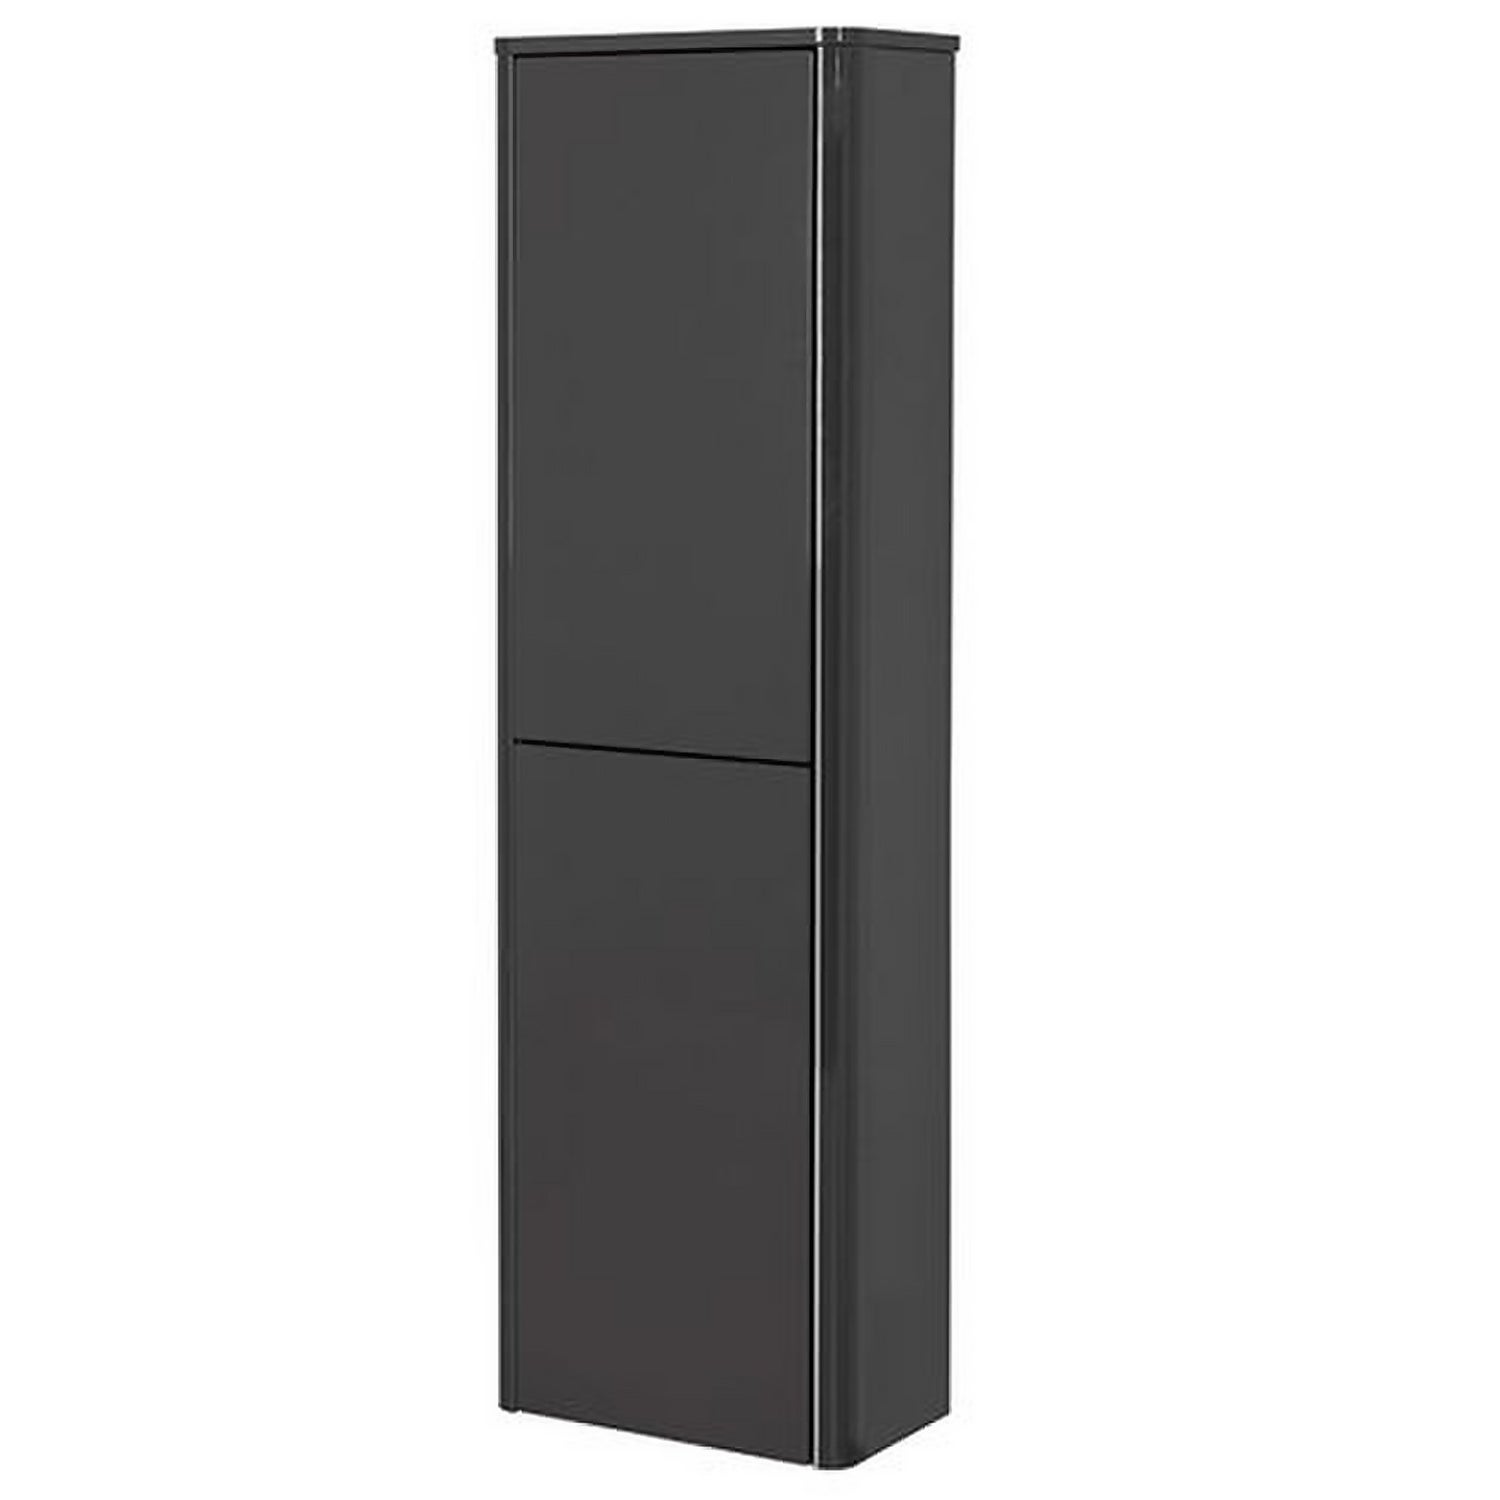 Lucca Tall Wall Mounted Storage Unit - Gloss Graphite